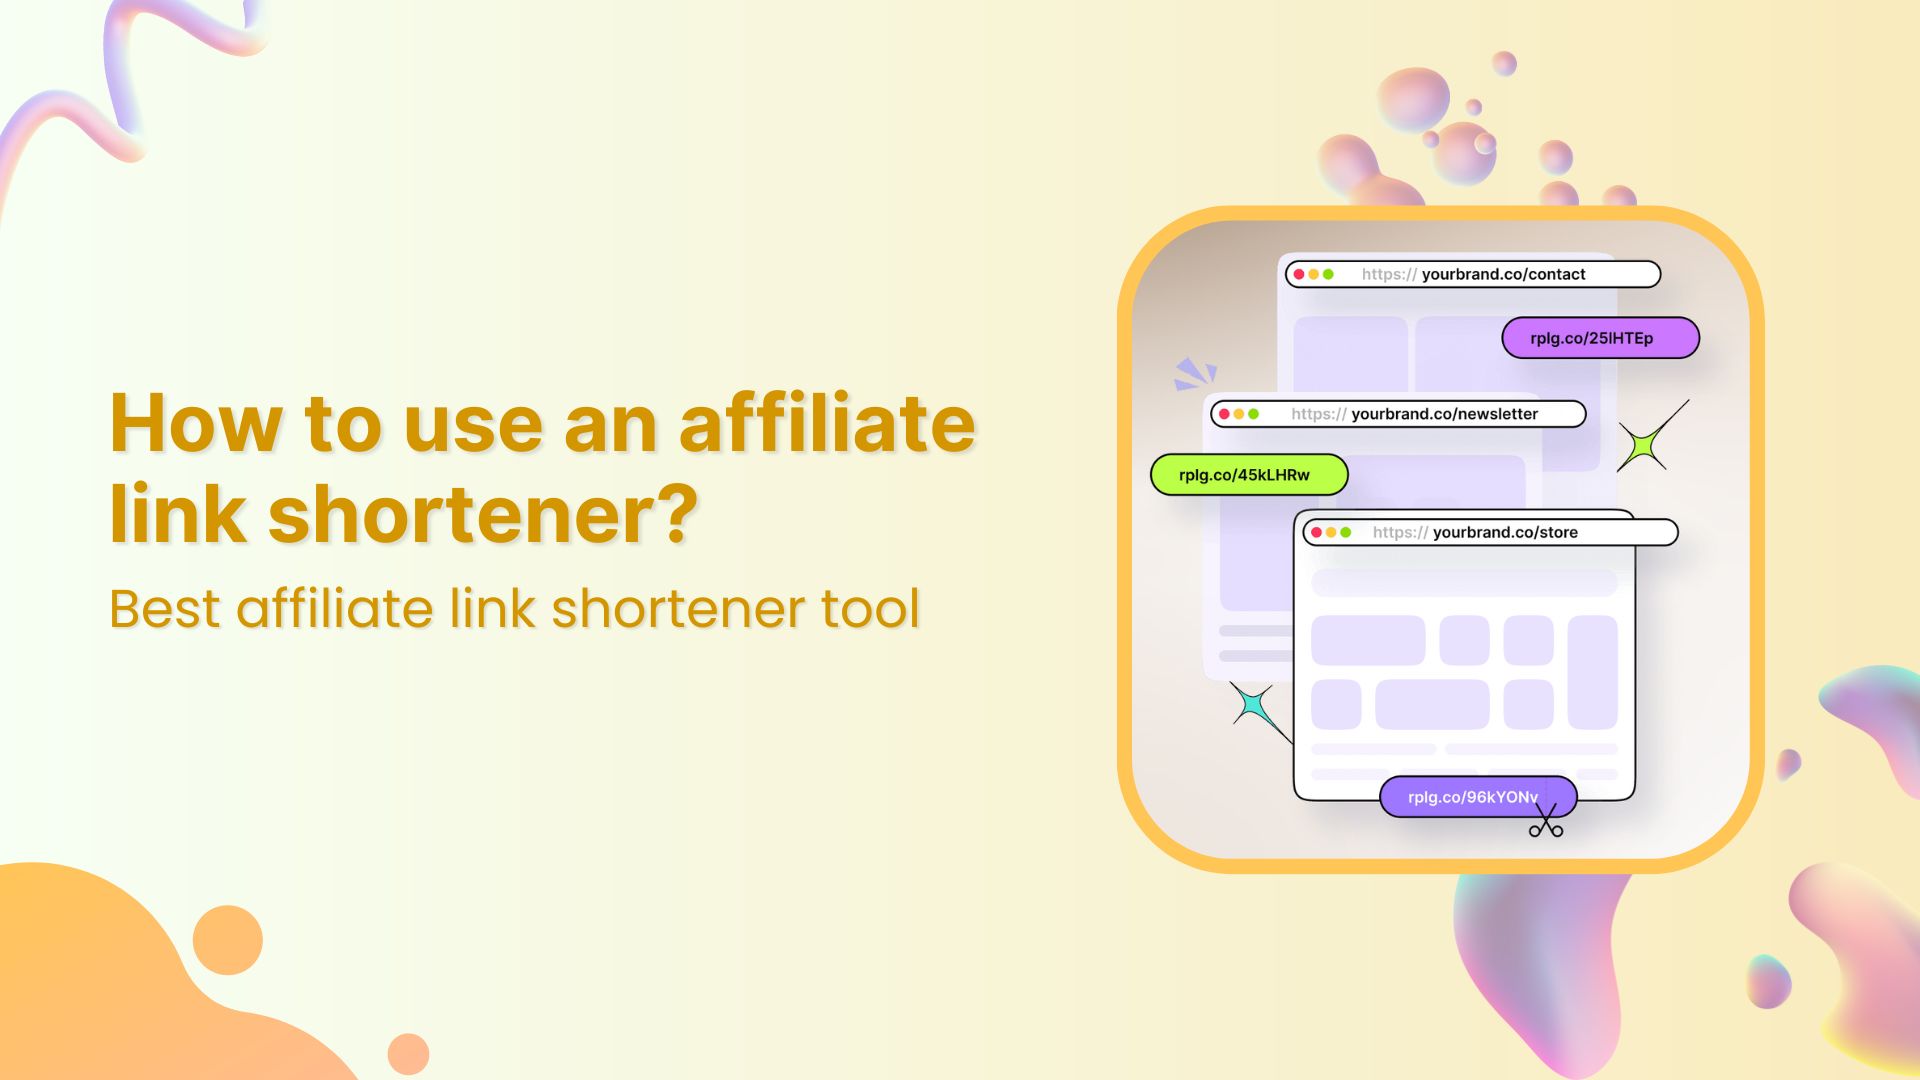 How to use an affiliate link shortener: A quick guide 